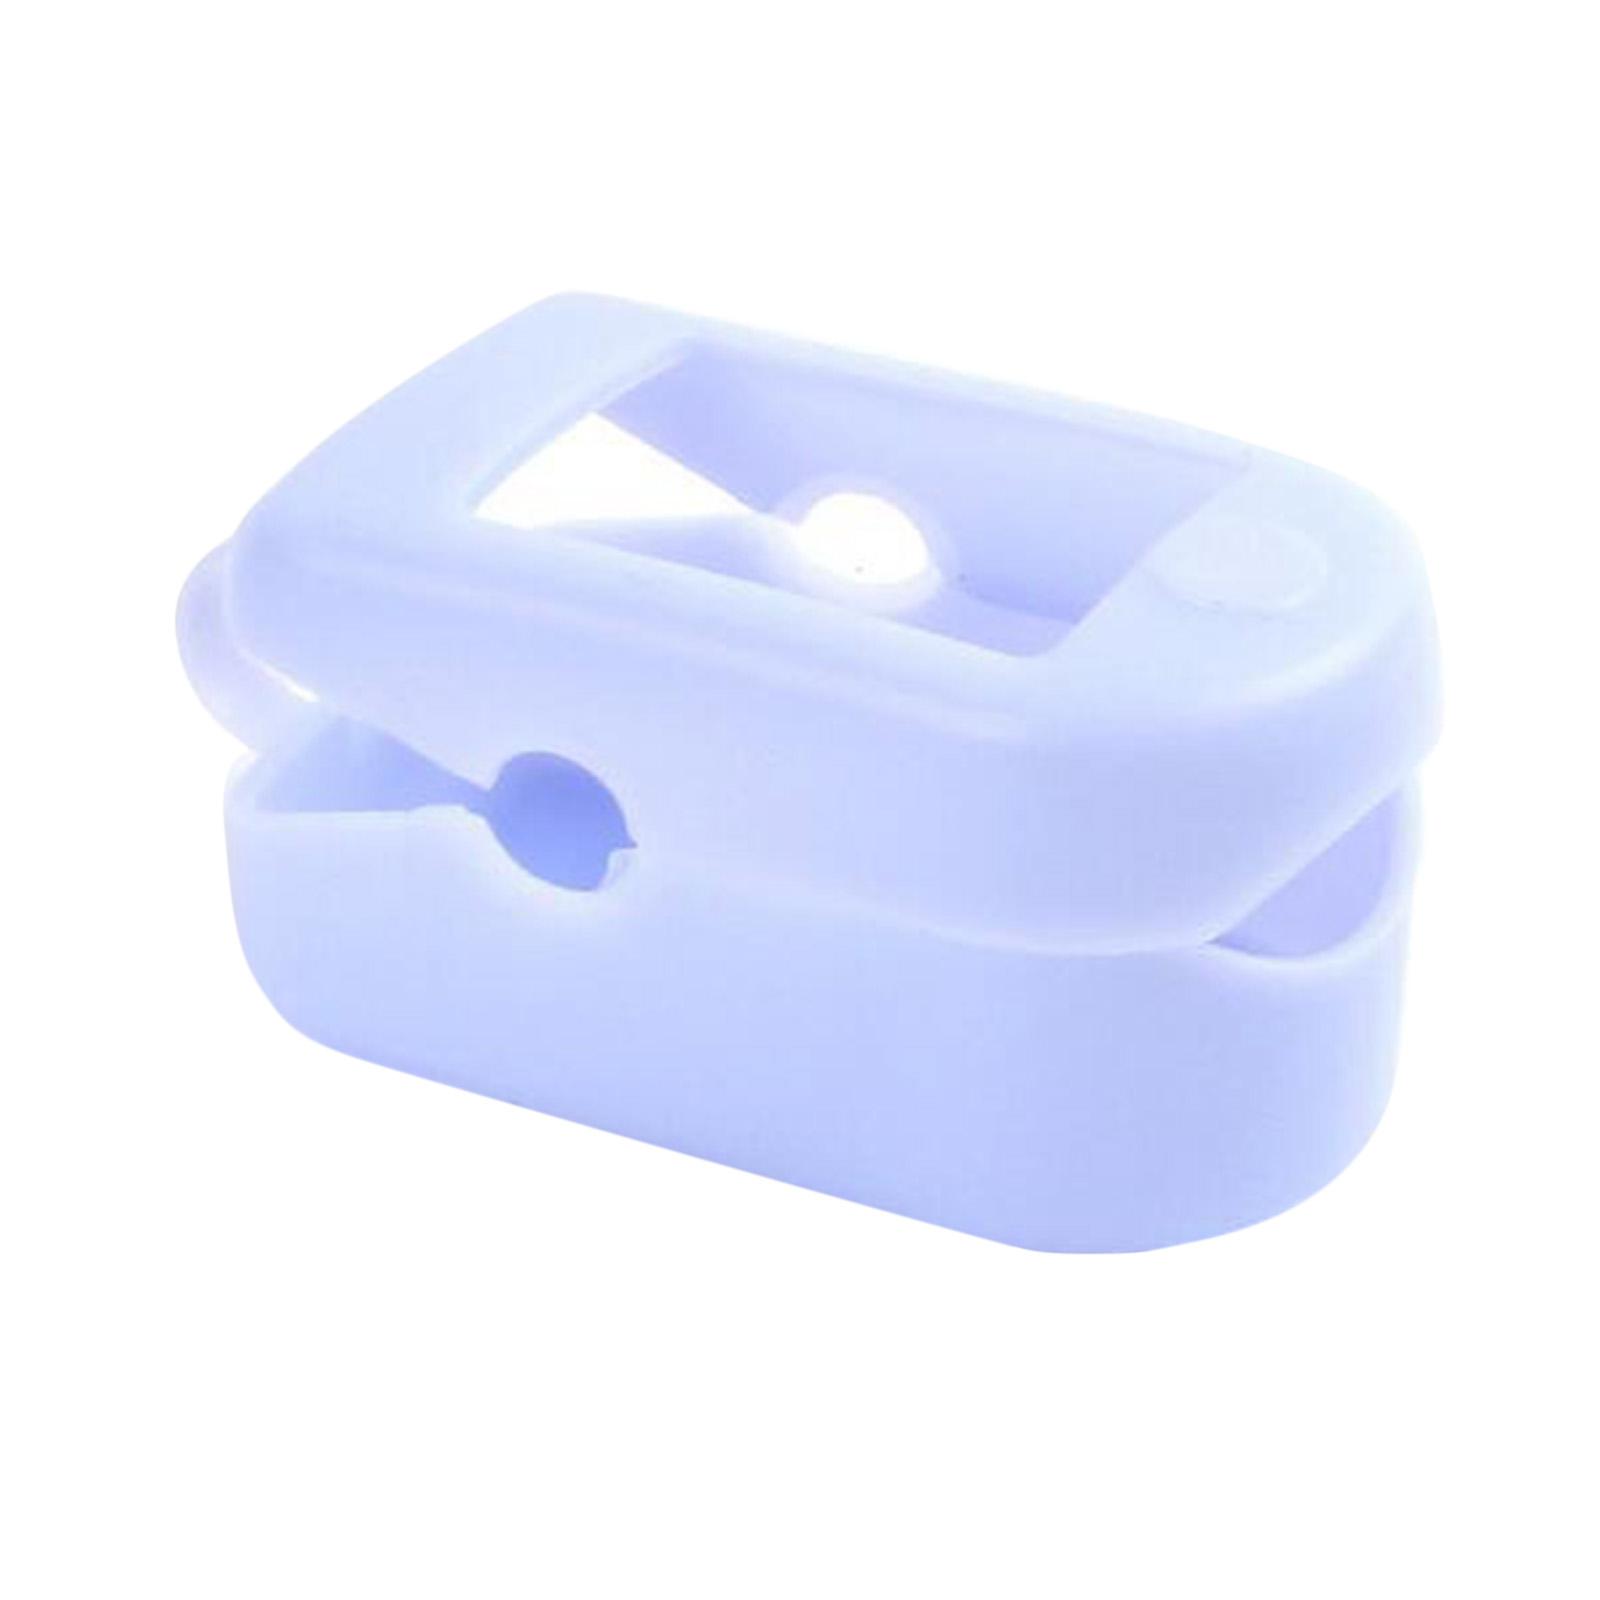 Blood Oxygen Case Silicone Fingertip Pulse Cover for Outdoor Travel Home Office Use, Easy to put on and take off, easy to use.